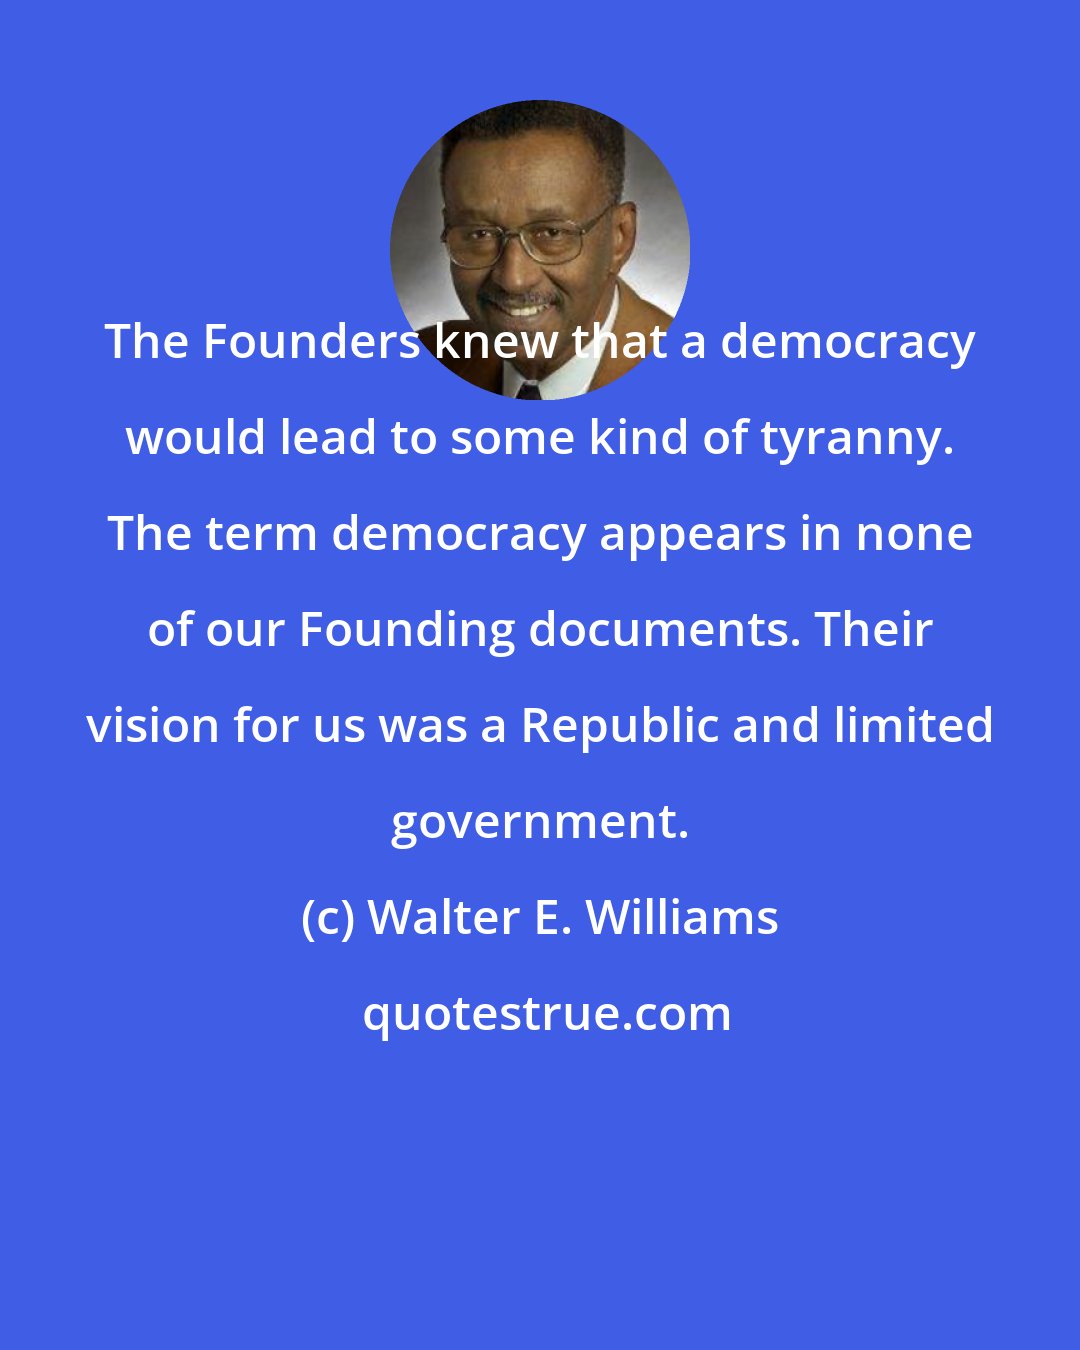 Walter E. Williams: The Founders knew that a democracy would lead to some kind of tyranny. The term democracy appears in none of our Founding documents. Their vision for us was a Republic and limited government.